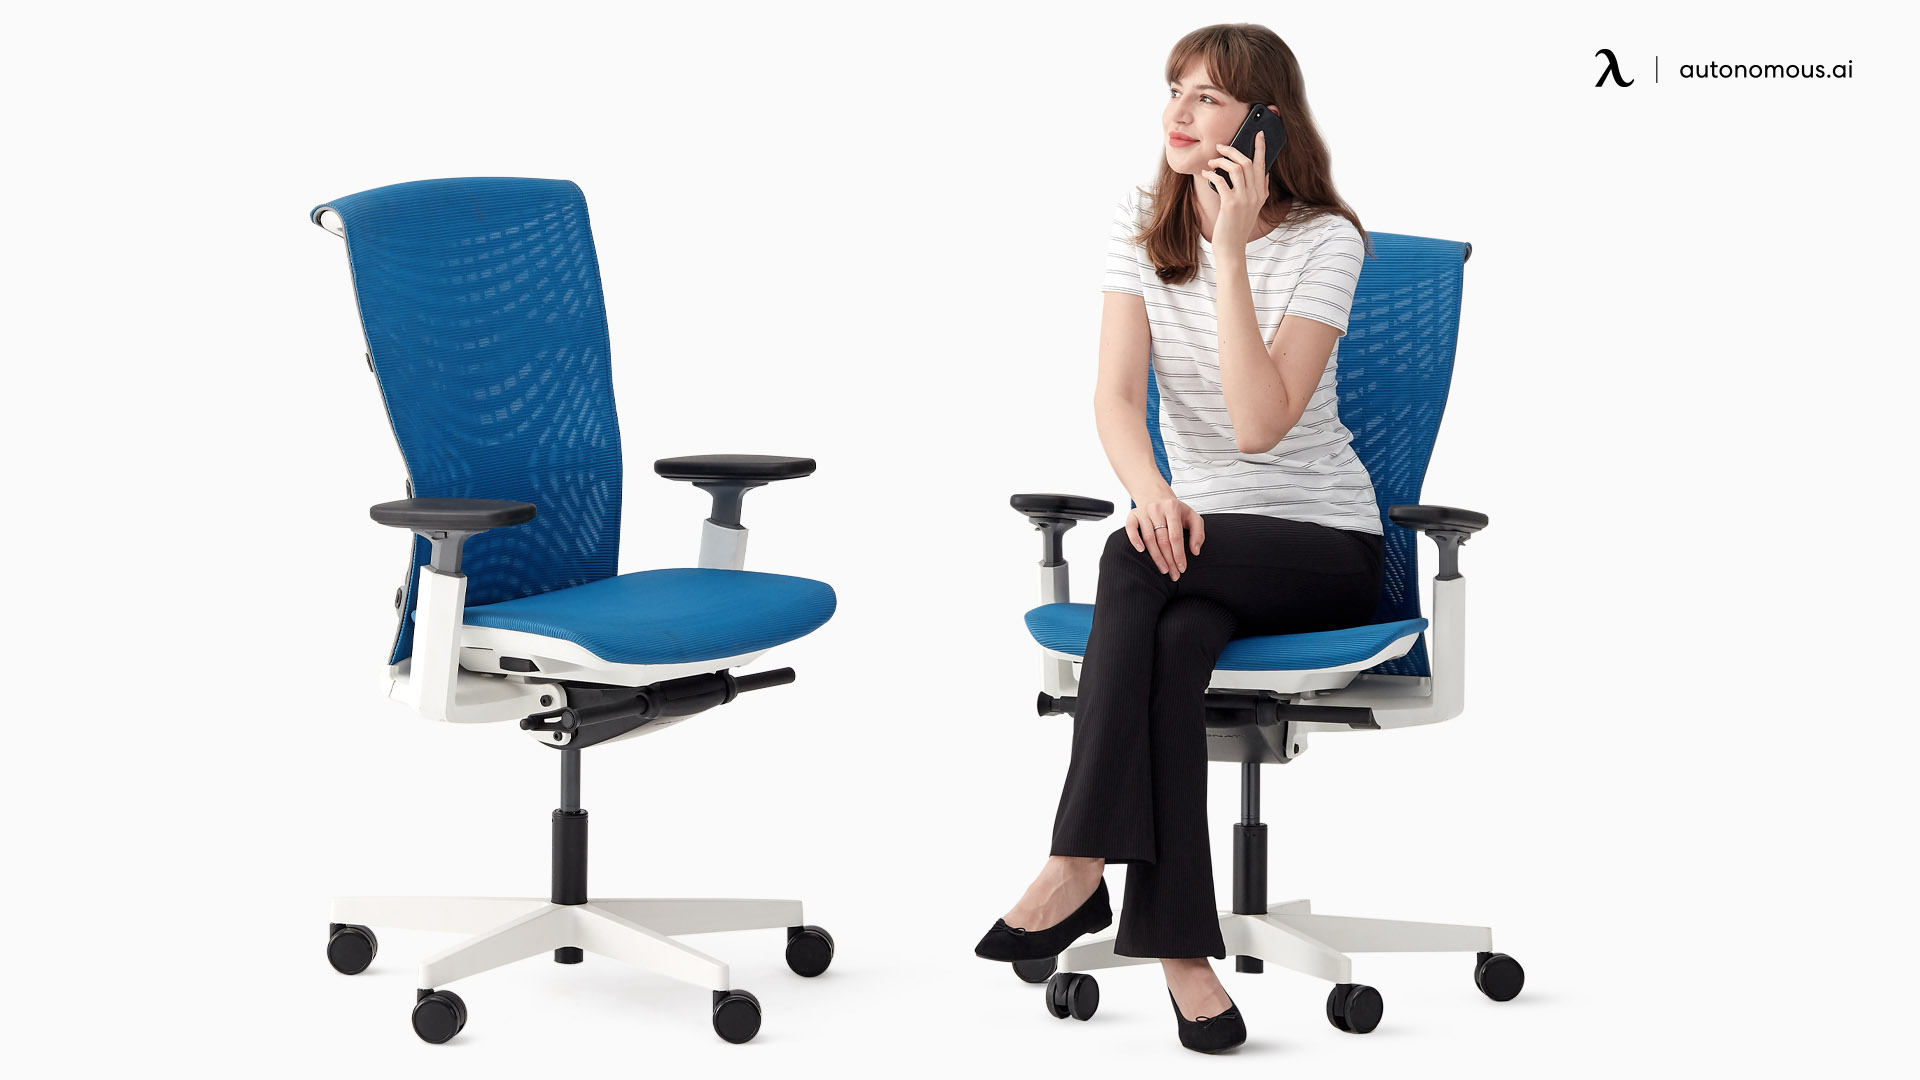 ErgoChair Pro+ colorful office chair